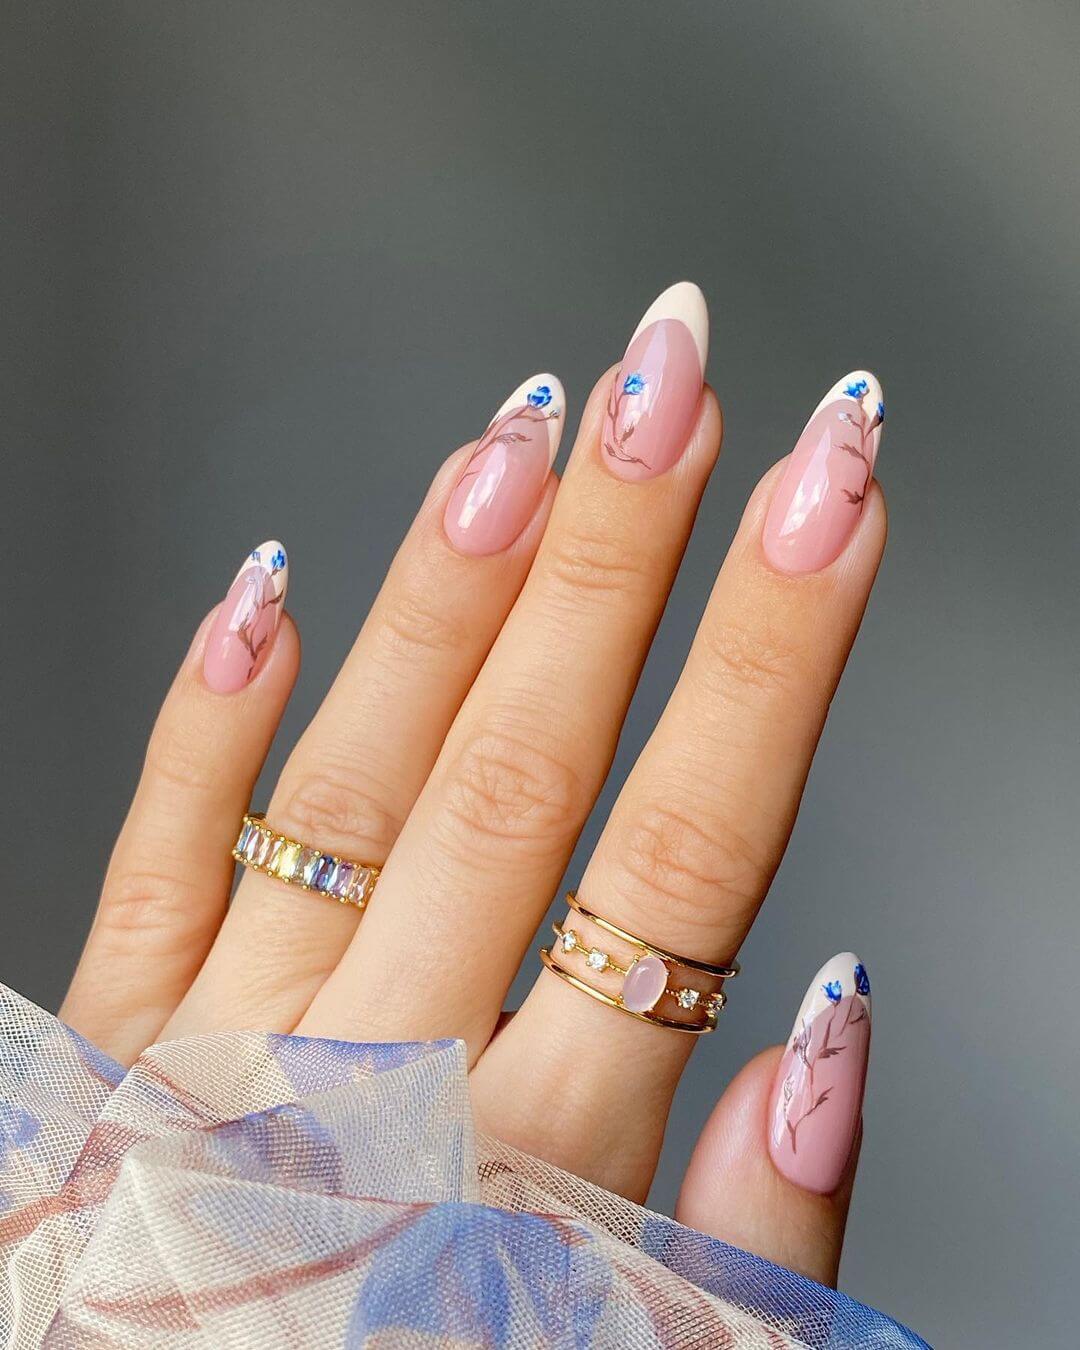 Pink Nail Art with Blue Flower